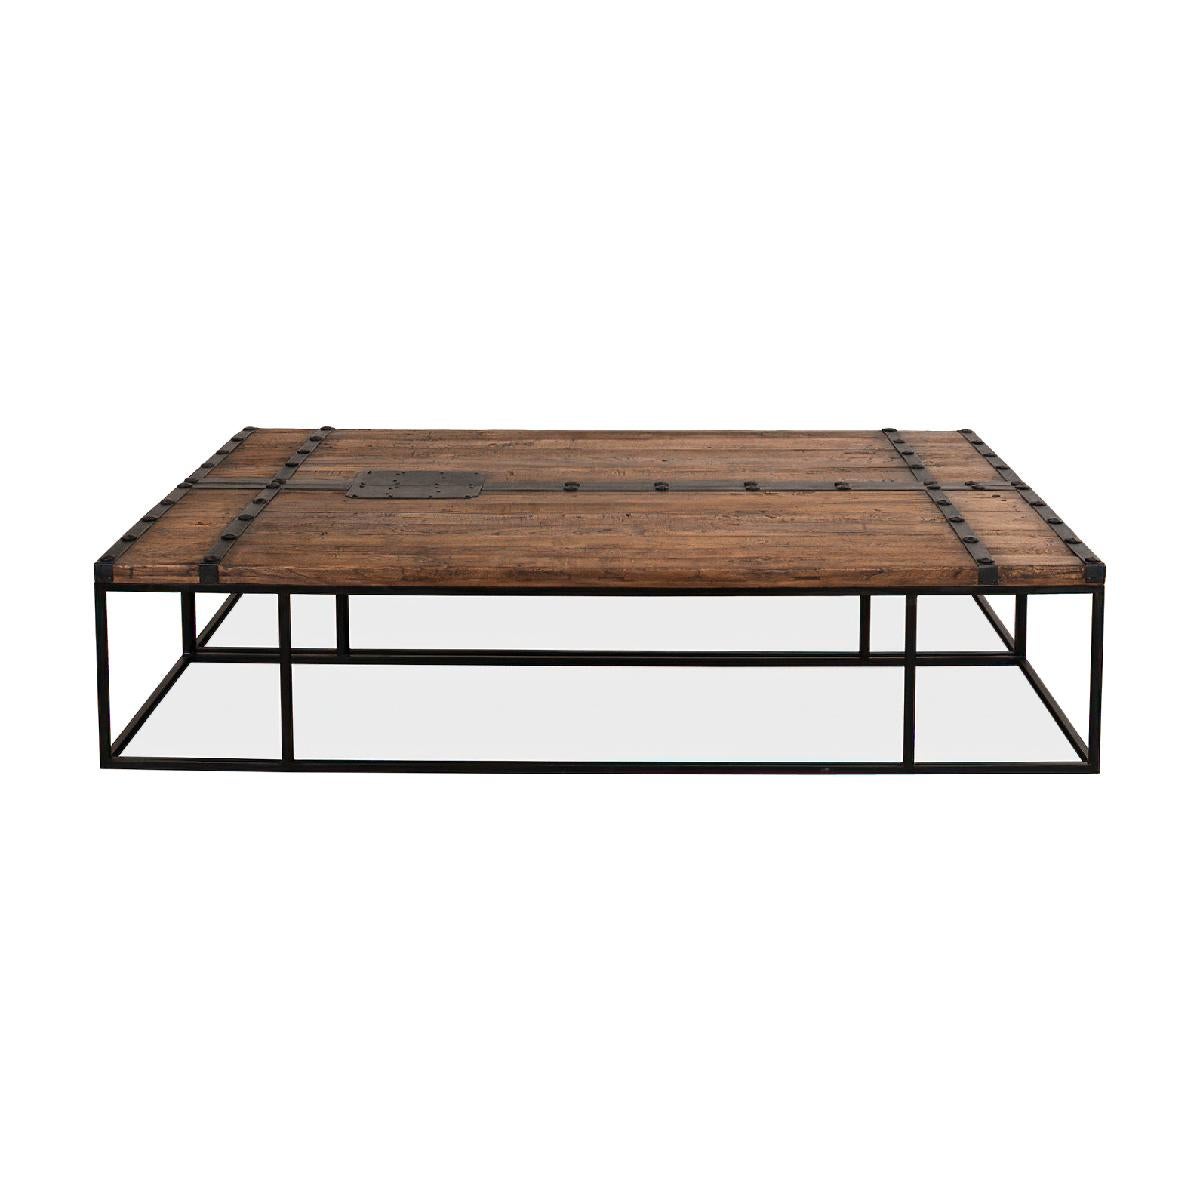 An antique door coffee table made from reclaimed elm doors and accented with iron hardware. This unique piece has a natural weathered wood top and rests on an iron base. Tables can be adjoined to be used as one large table or can be separated for a